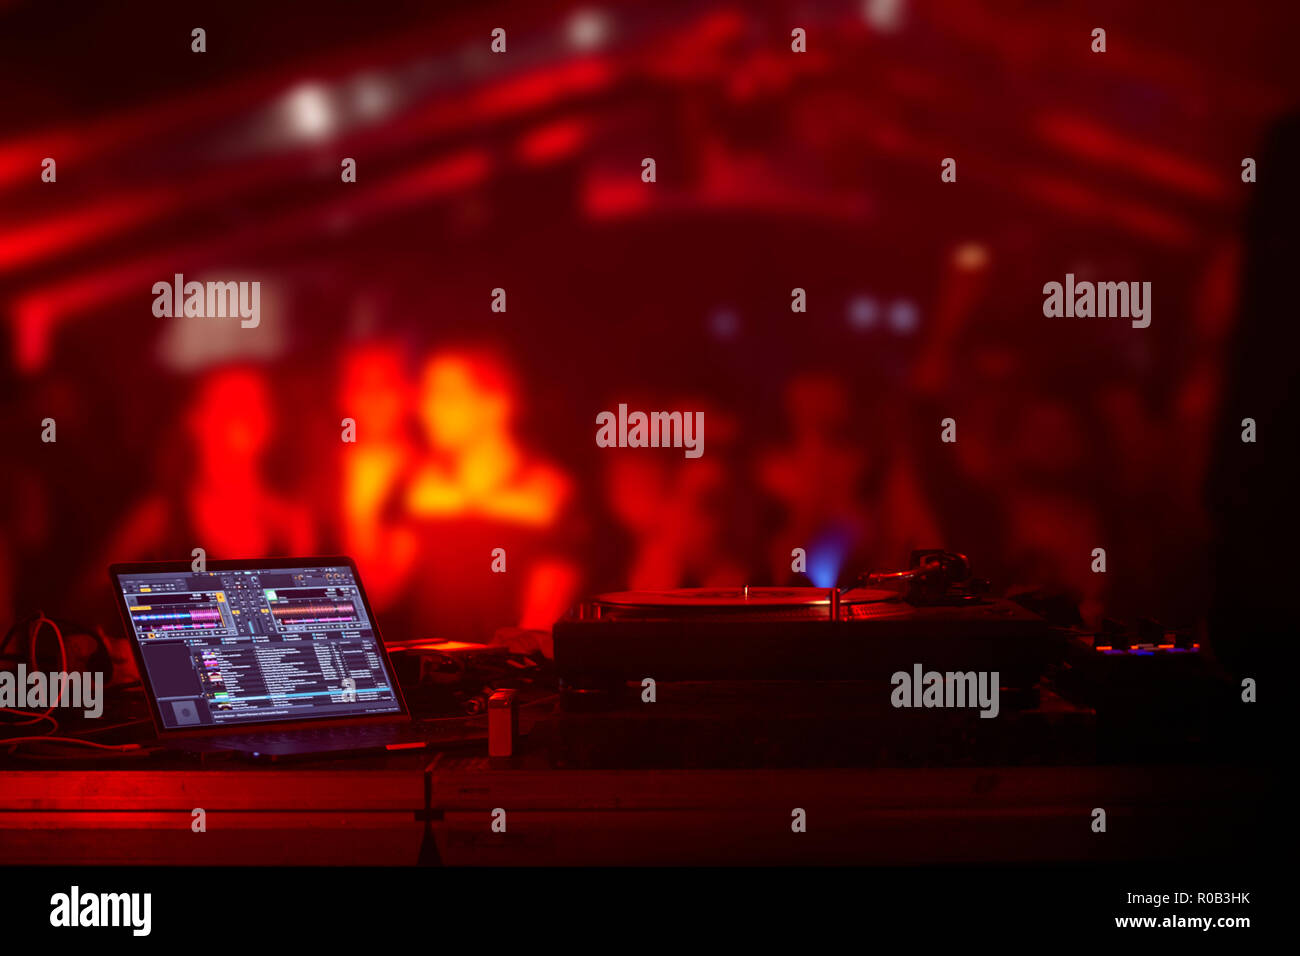 party, crown out of focus in background, dj equipment backstage, red colorful light Stock Photo